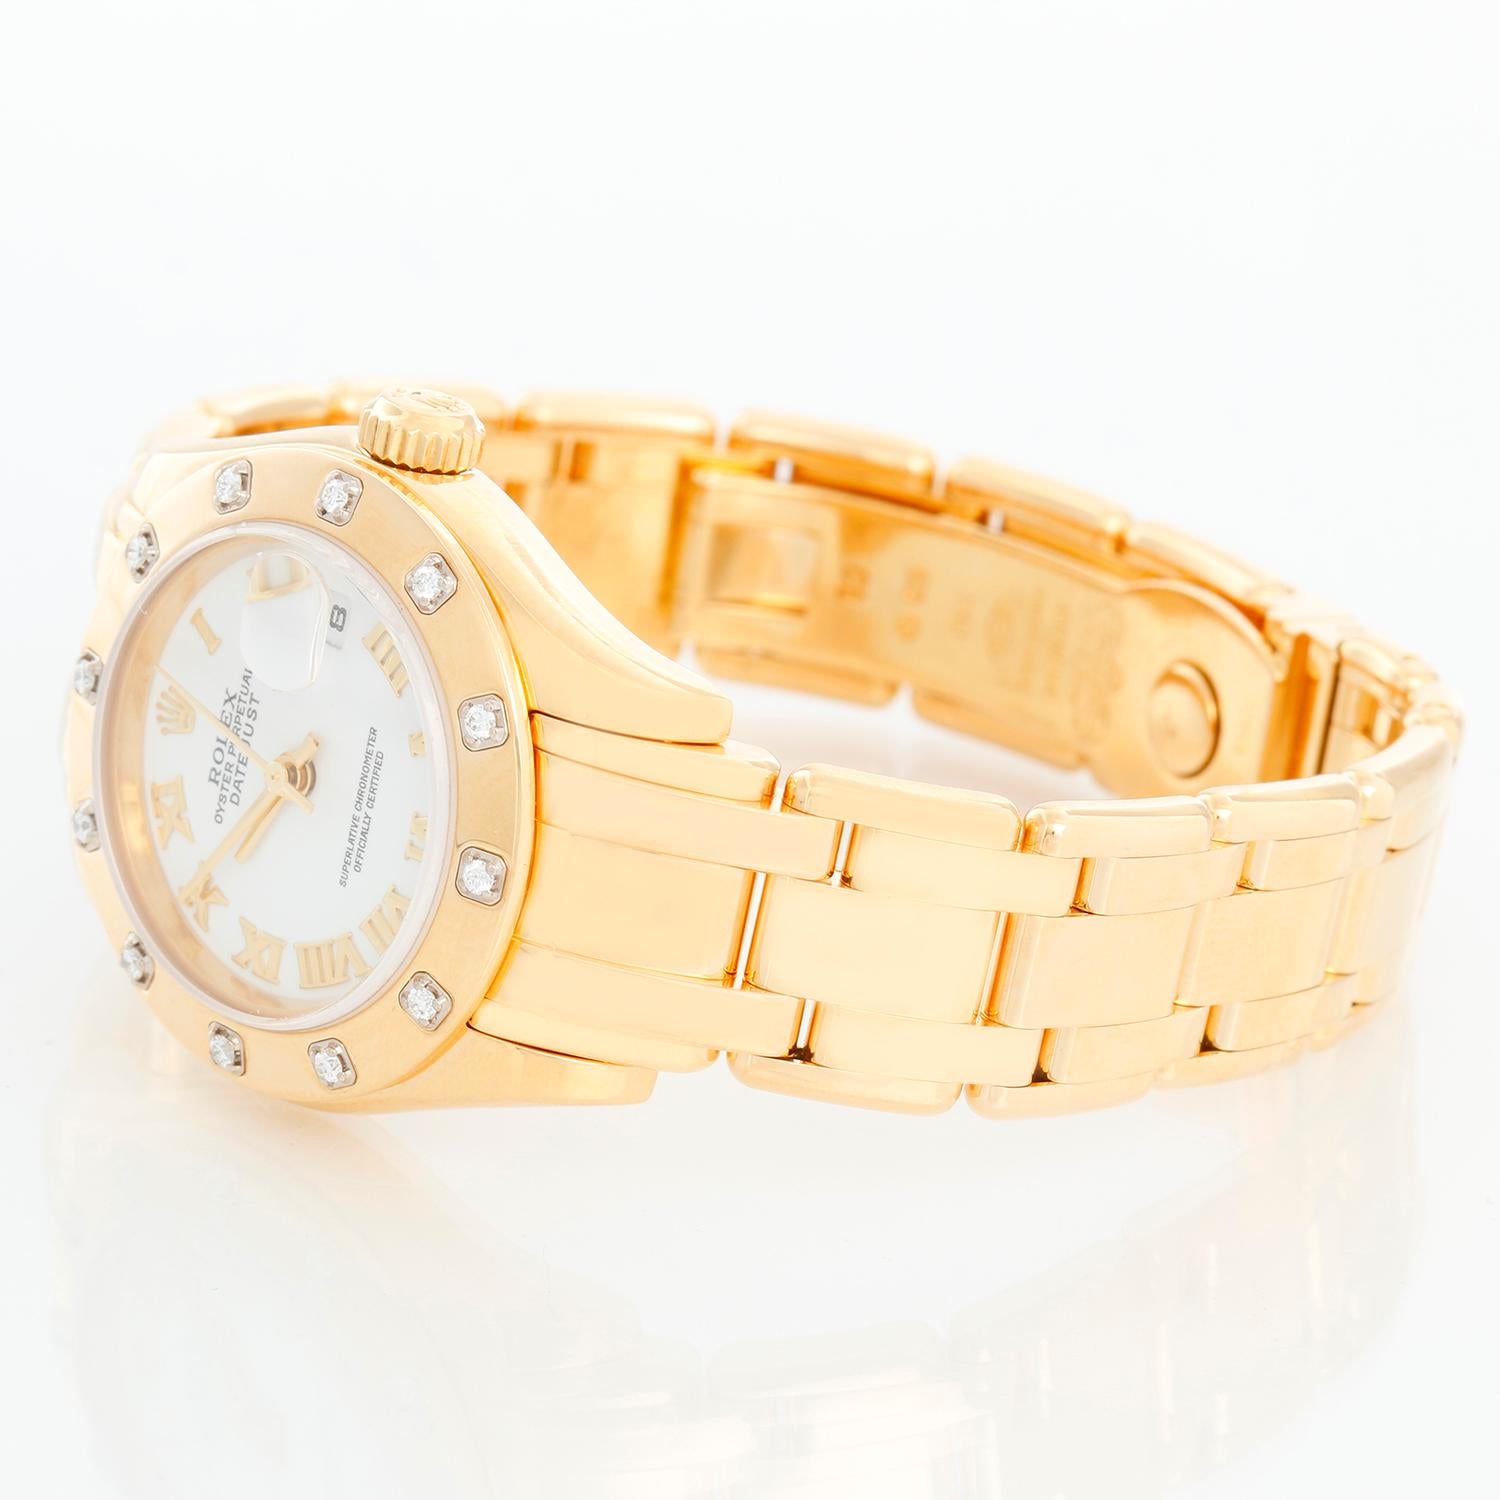 Rolex Lady Datejust Pearlmaster 18k Yellow Gold Ladies Diamond Watch 80318 - Automatic winding, 31 jewels, Quickset, sapphire crystal. 18k yellow gold case with factory 12 diamond bezel (29mm diameter). White Roman numerals Dial. 18k yellow gold